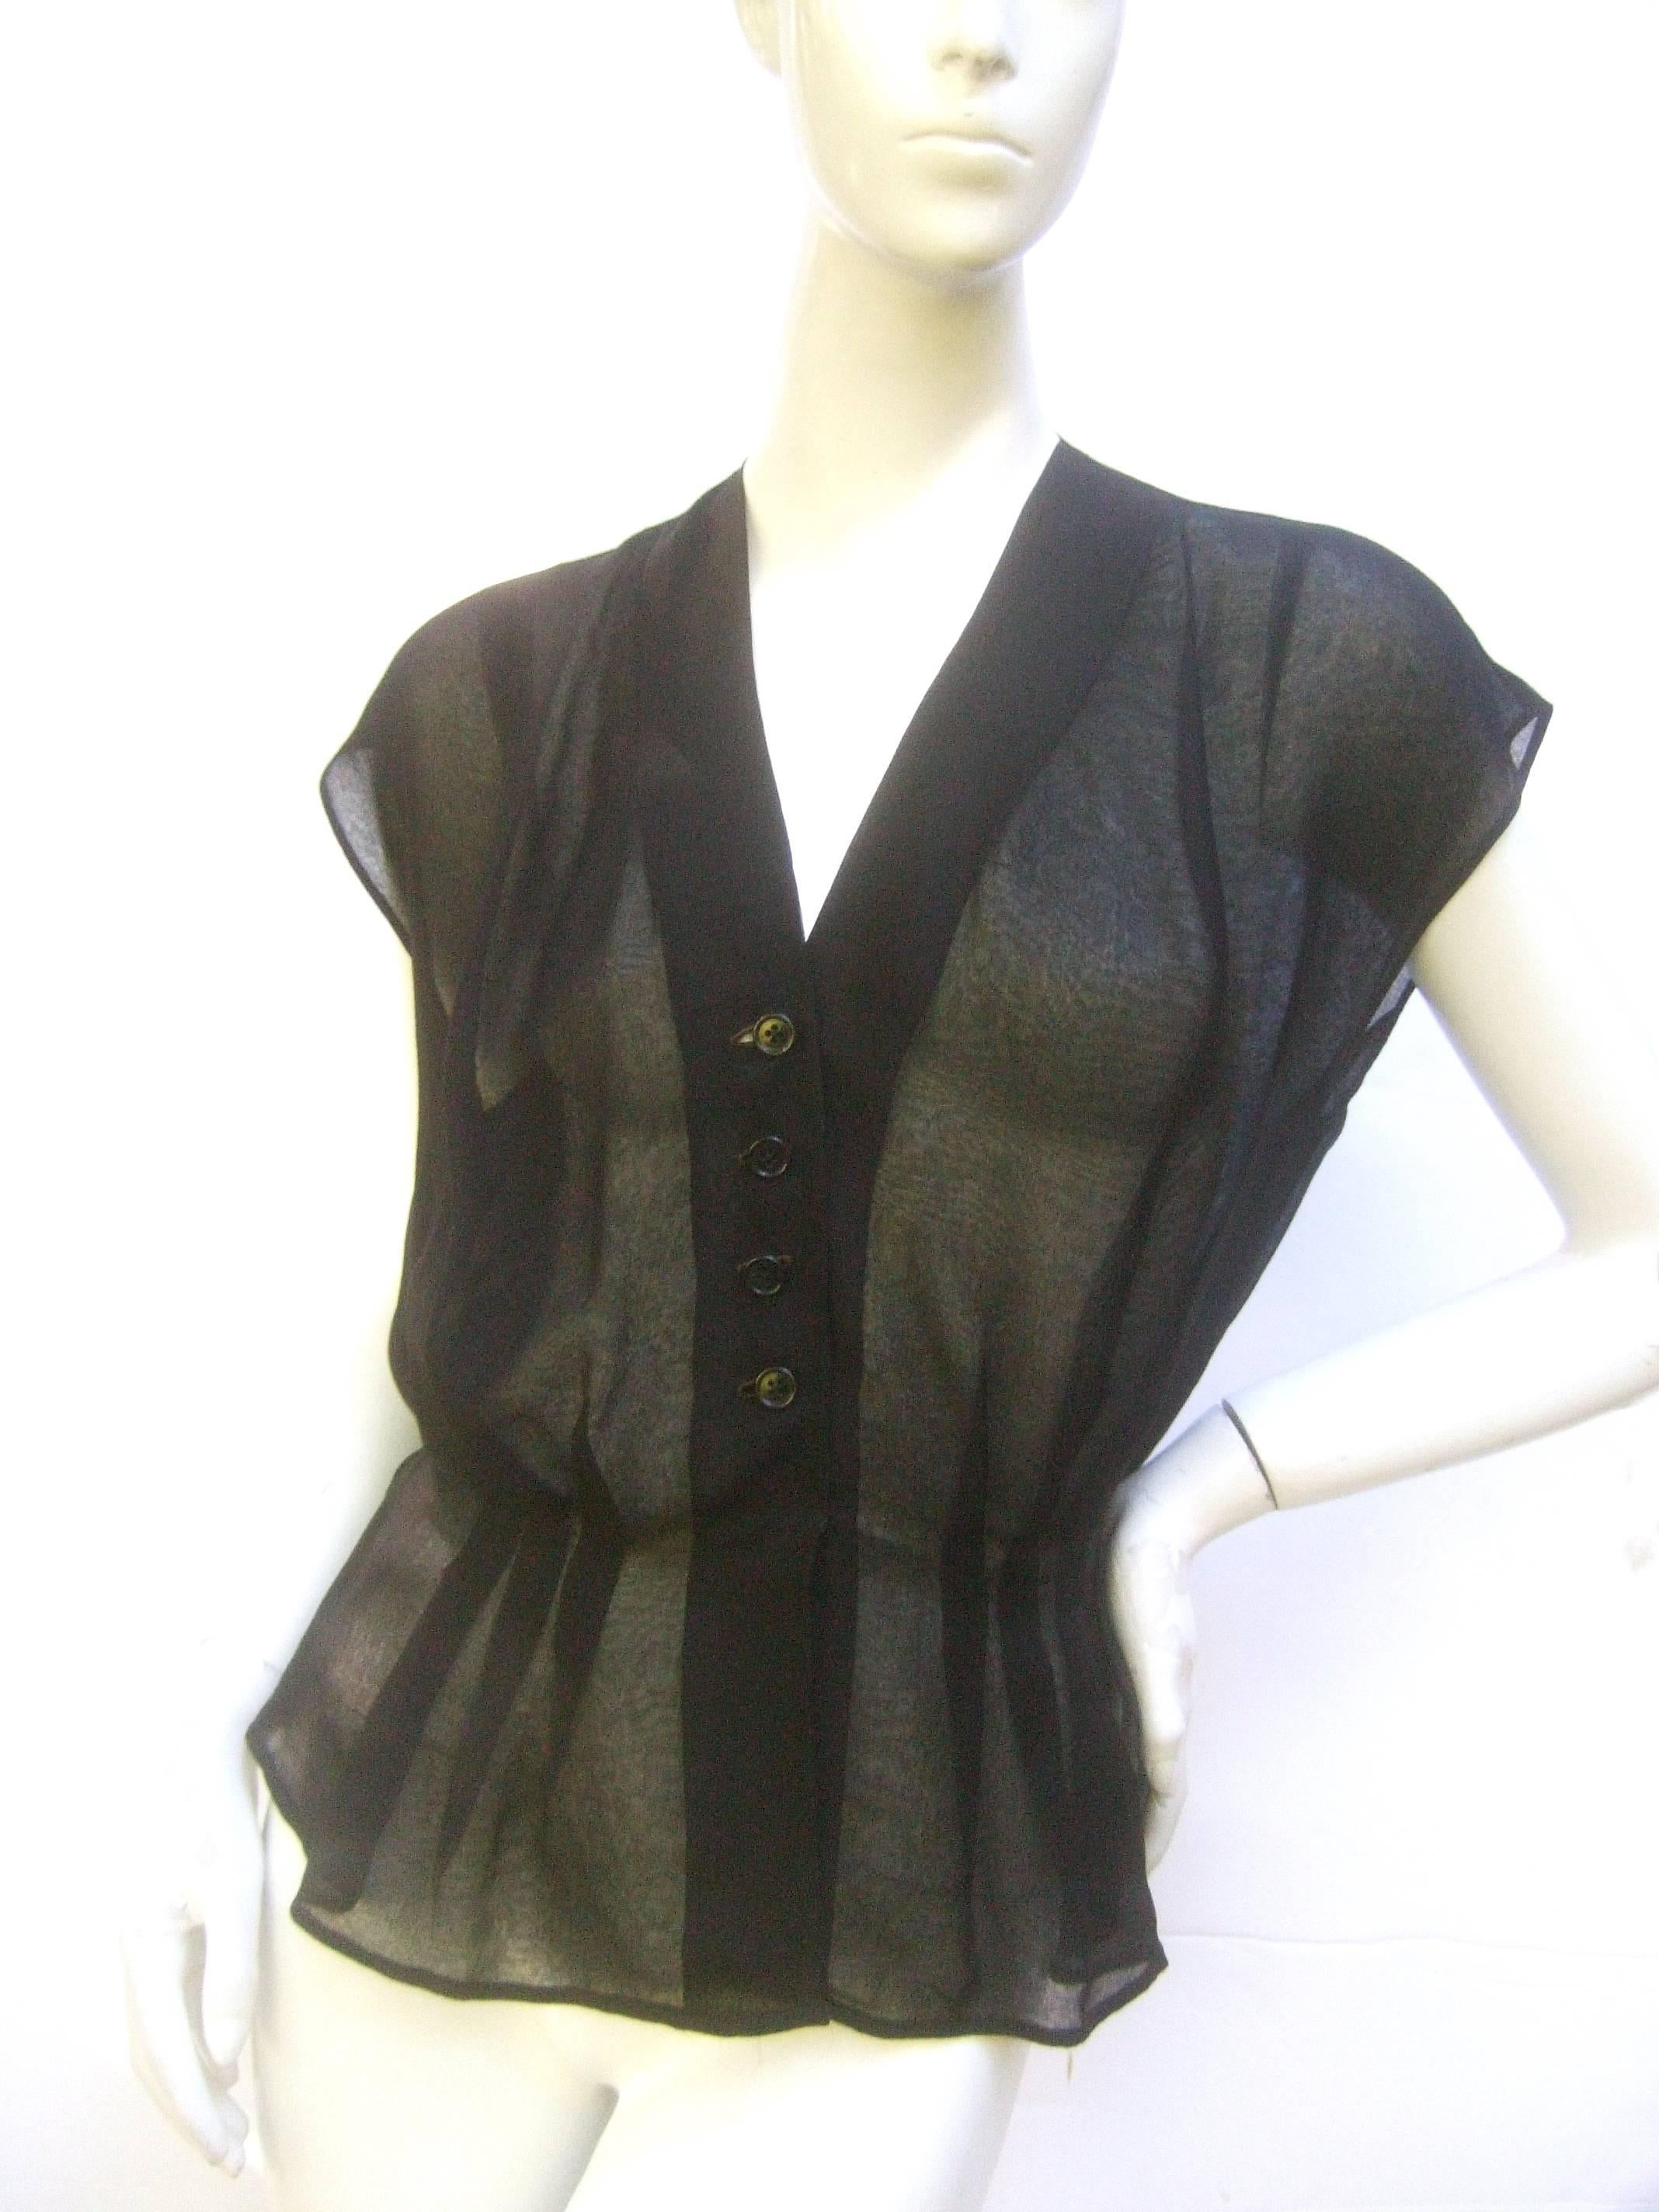 Christain Dior sheer black silk blouse c 1970
The elegant black sheer silk short sleeve 
blouse buttons down the front with a set
of small black lucite buttons

The sheer illusion silk fabric may require 
a camisole and or black lace bra